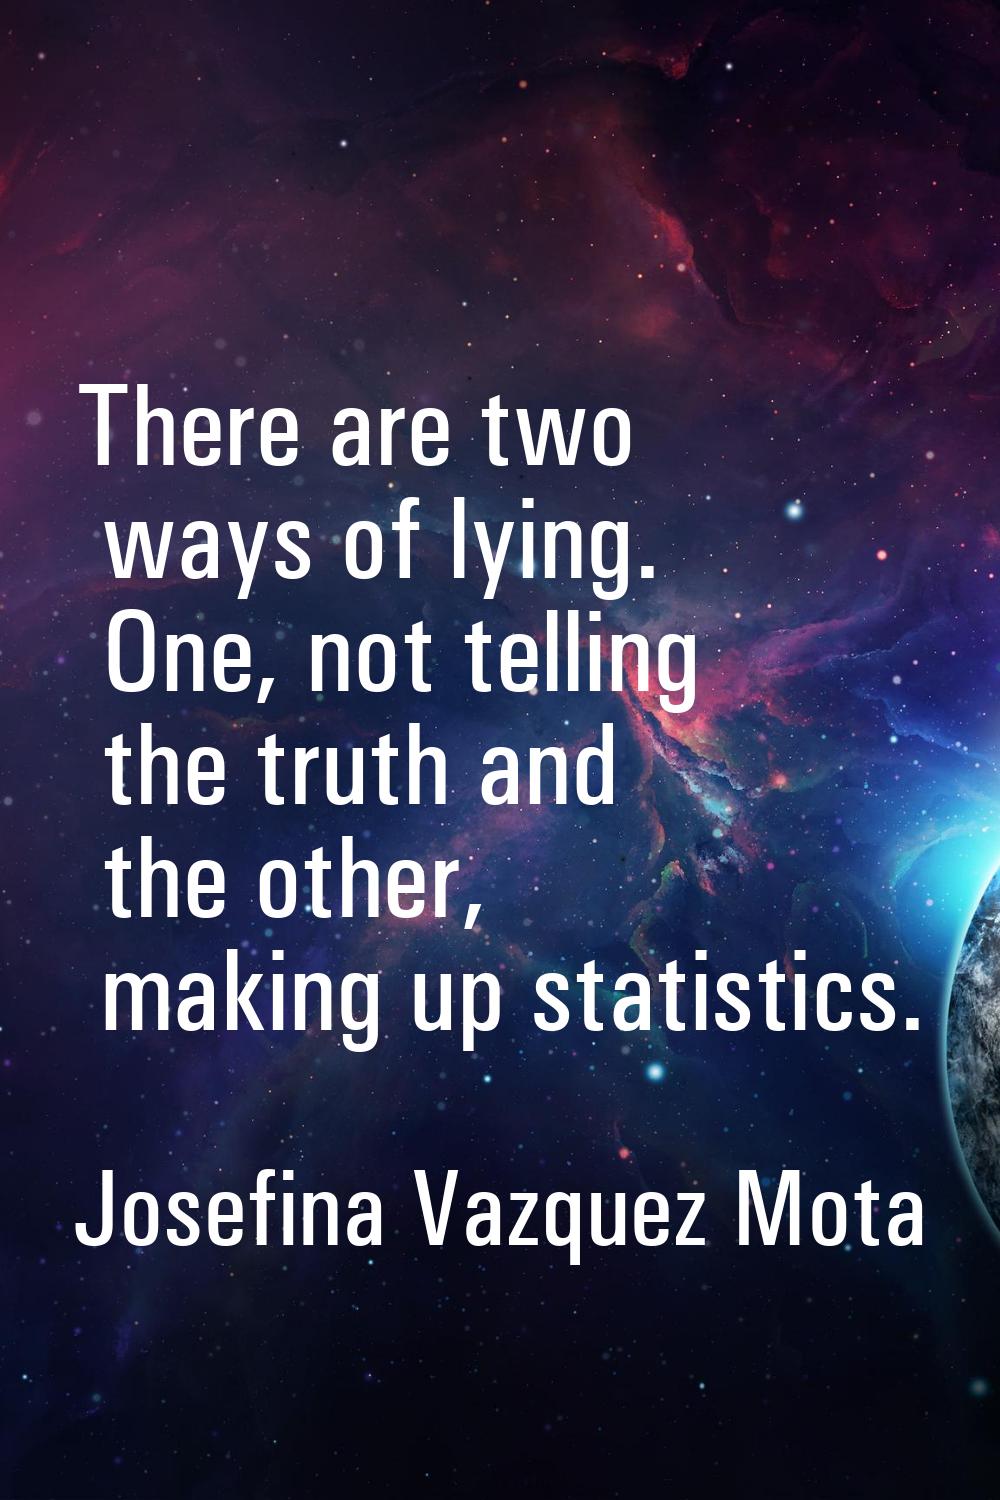 There are two ways of lying. One, not telling the truth and the other, making up statistics.